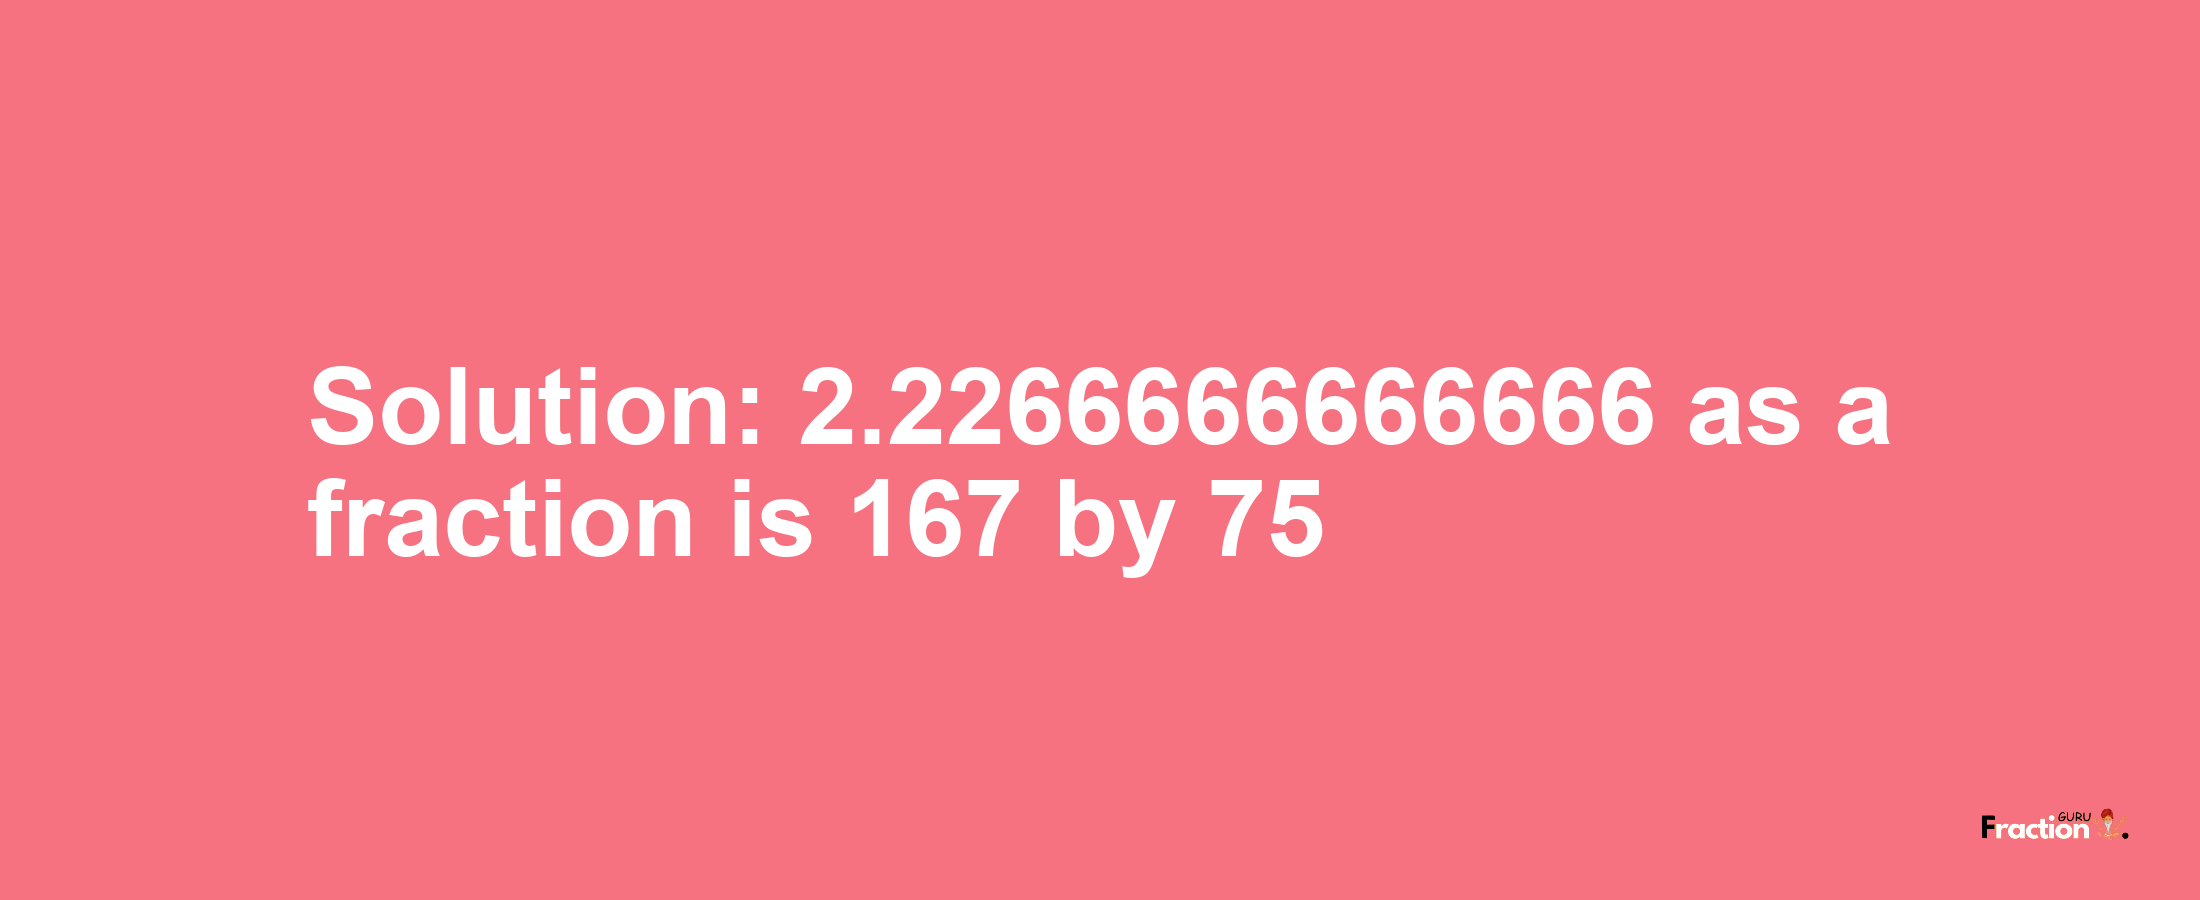 Solution:2.2266666666666 as a fraction is 167/75